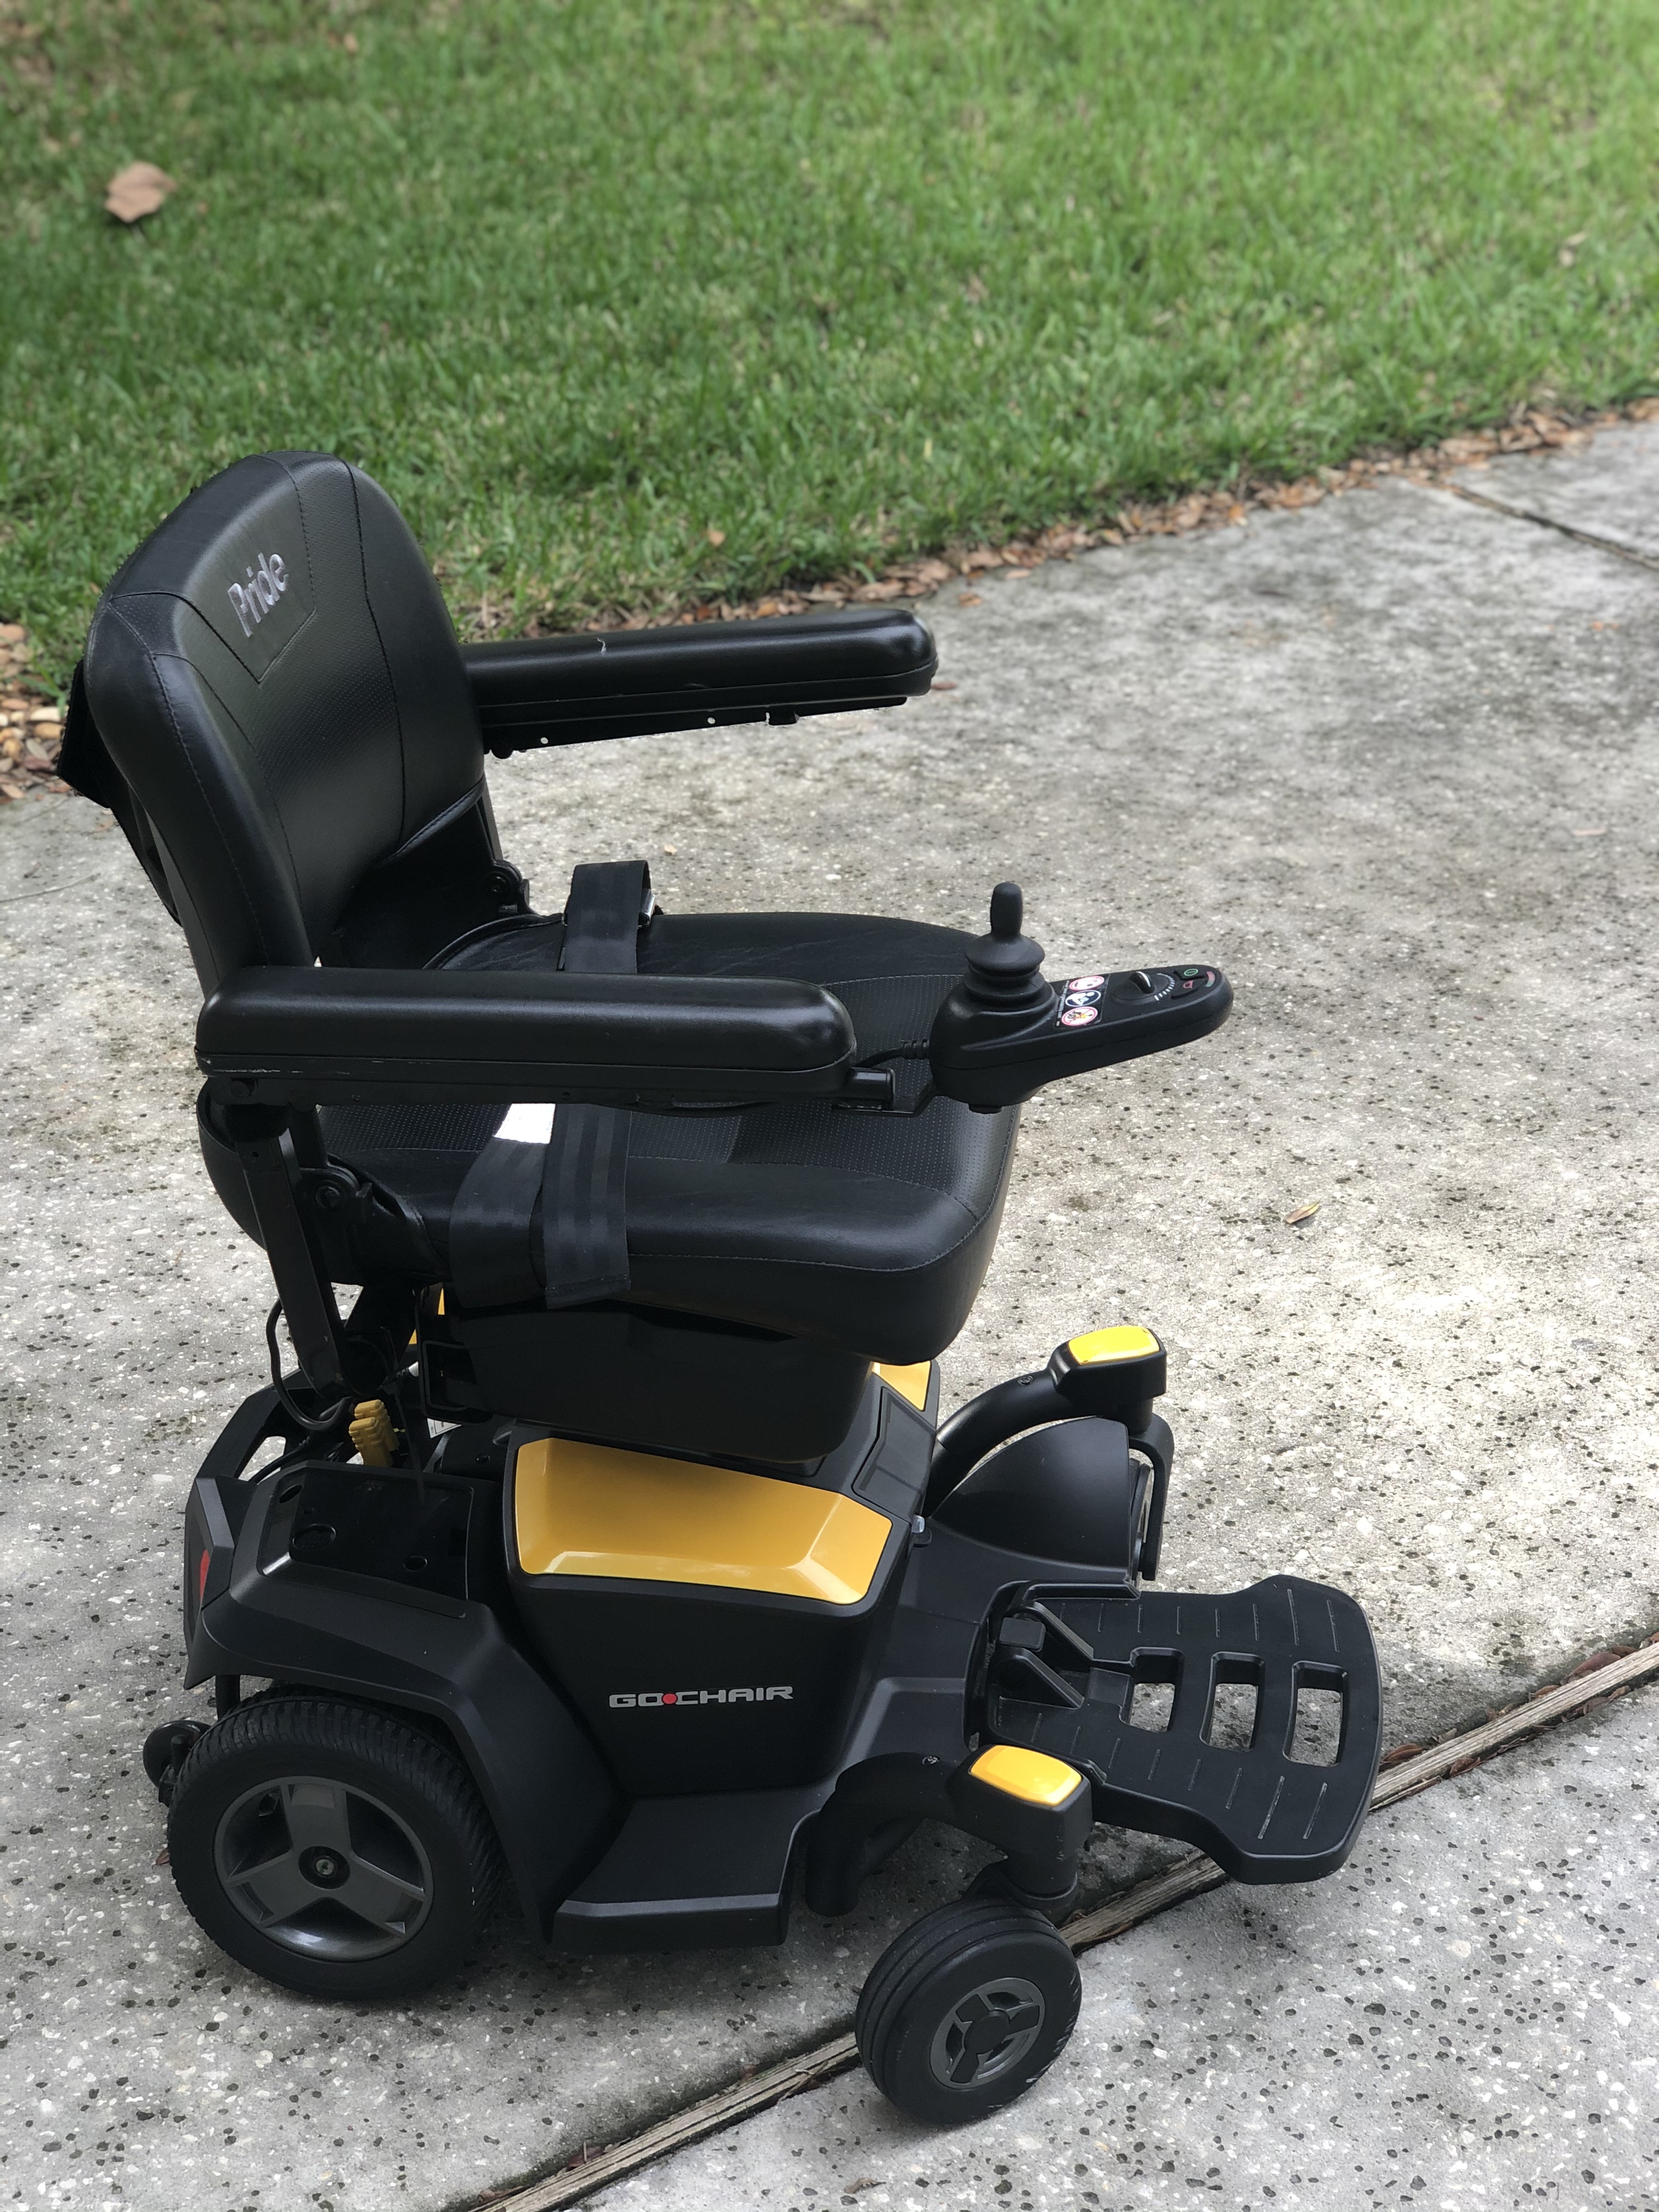 Power Wheelchair Buy Sell Used Electric Wheelchairs Mobility